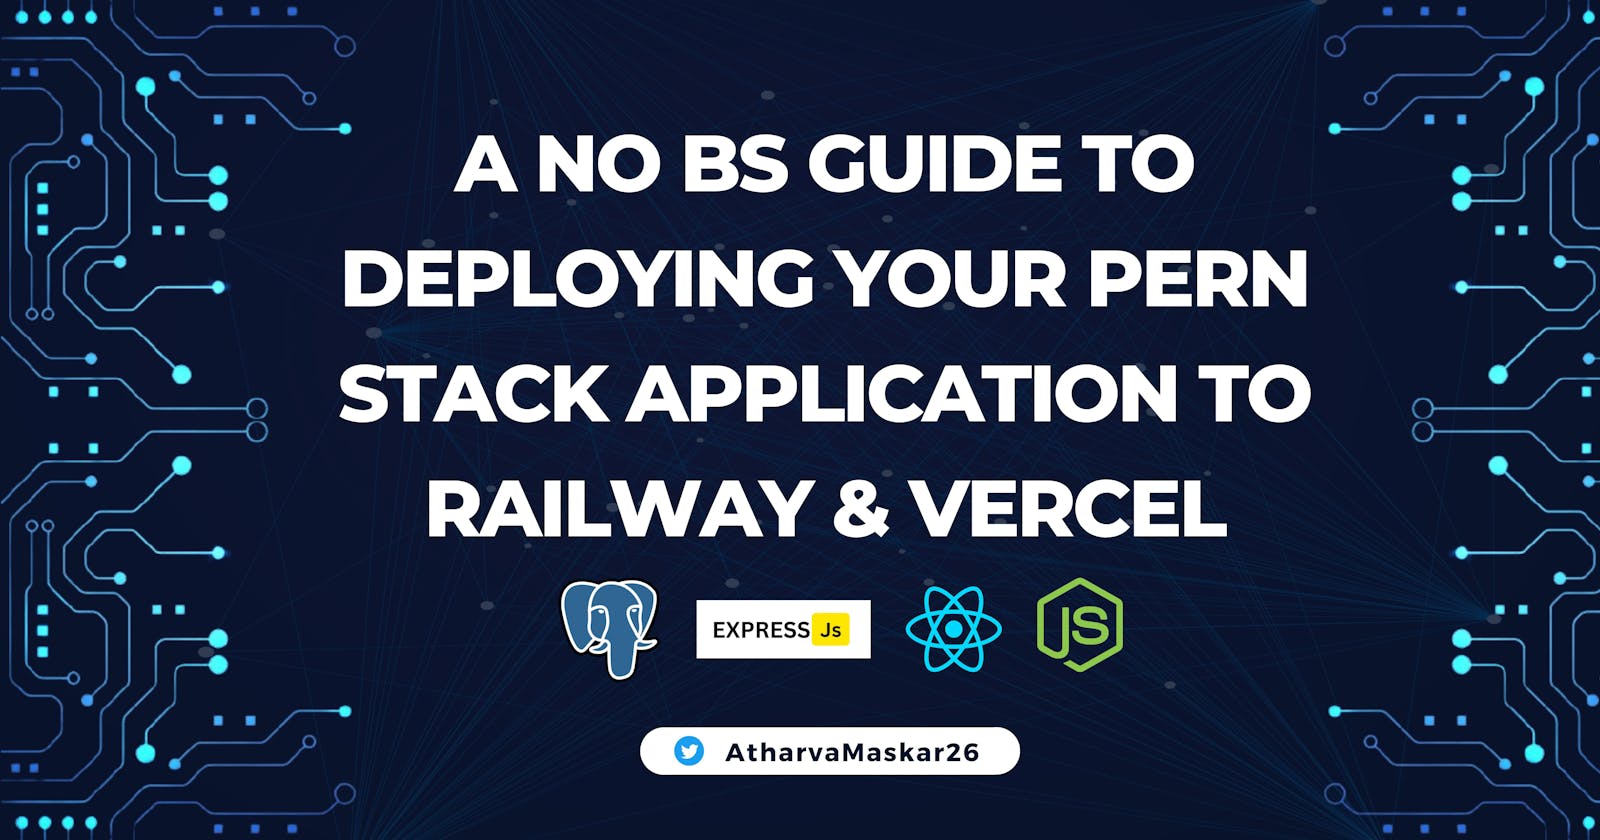 Deploy Your PERN Stack Project to Railway & Vercel in 3 Minutes